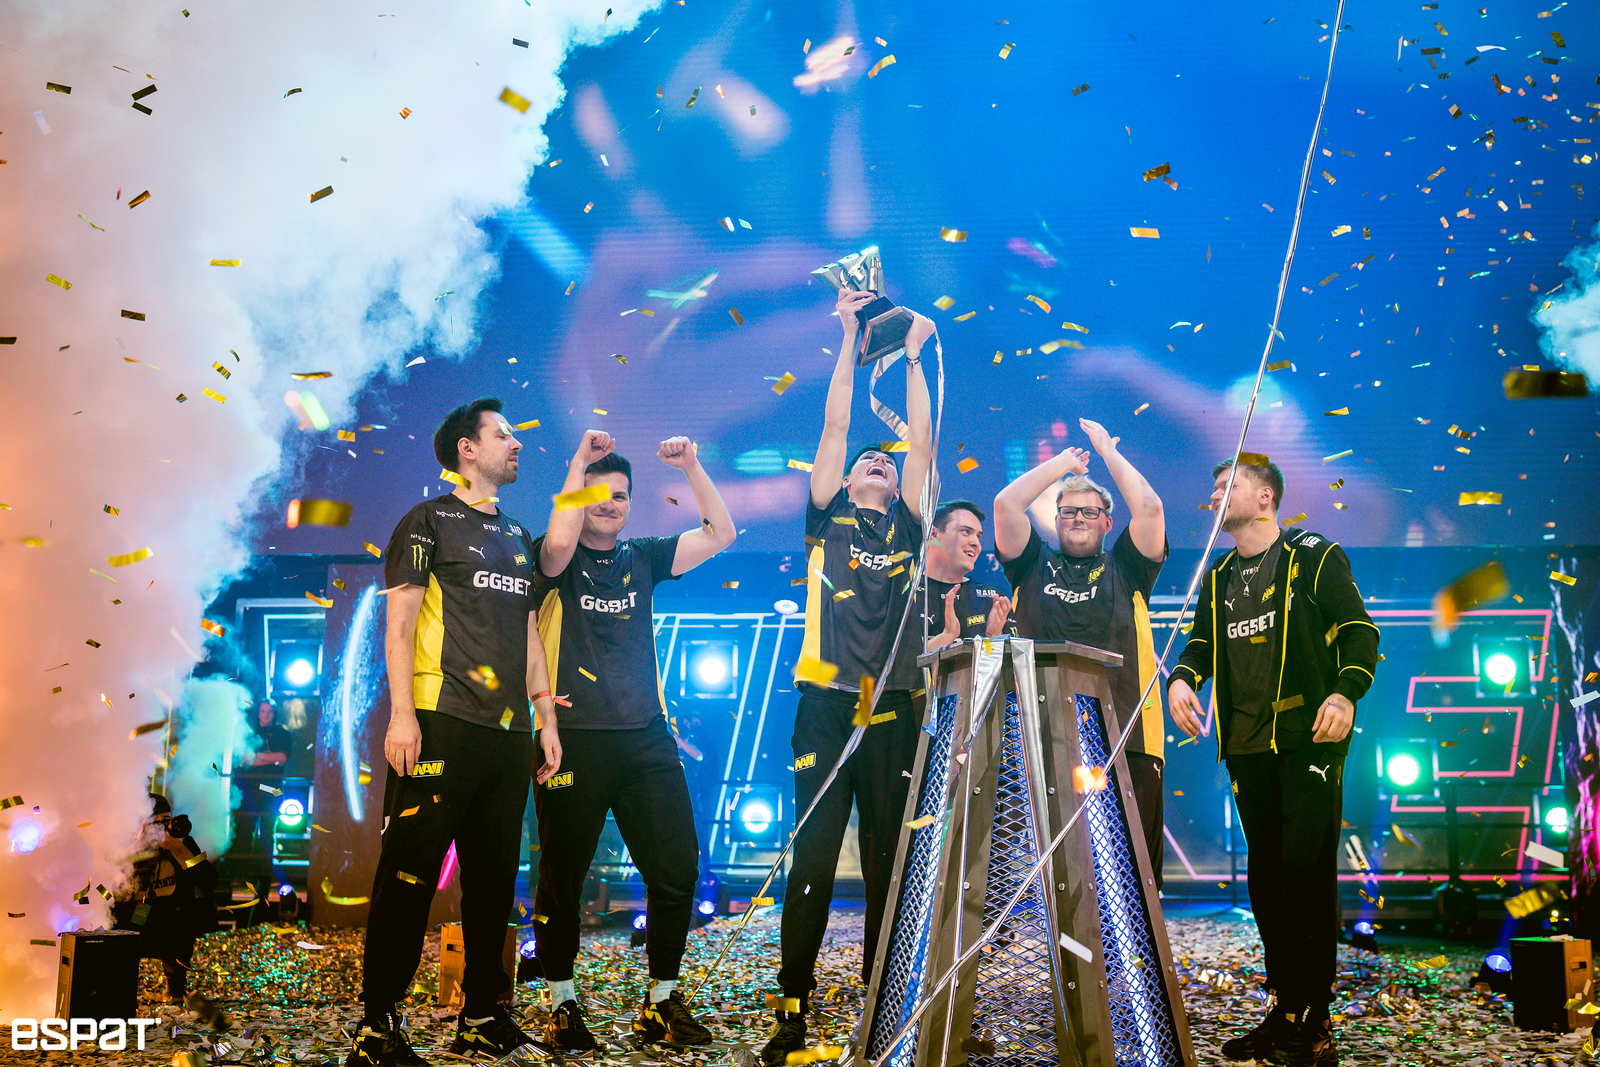 The roster for NAVI lift the trophy after winning the PGL Major Stockholm 2021